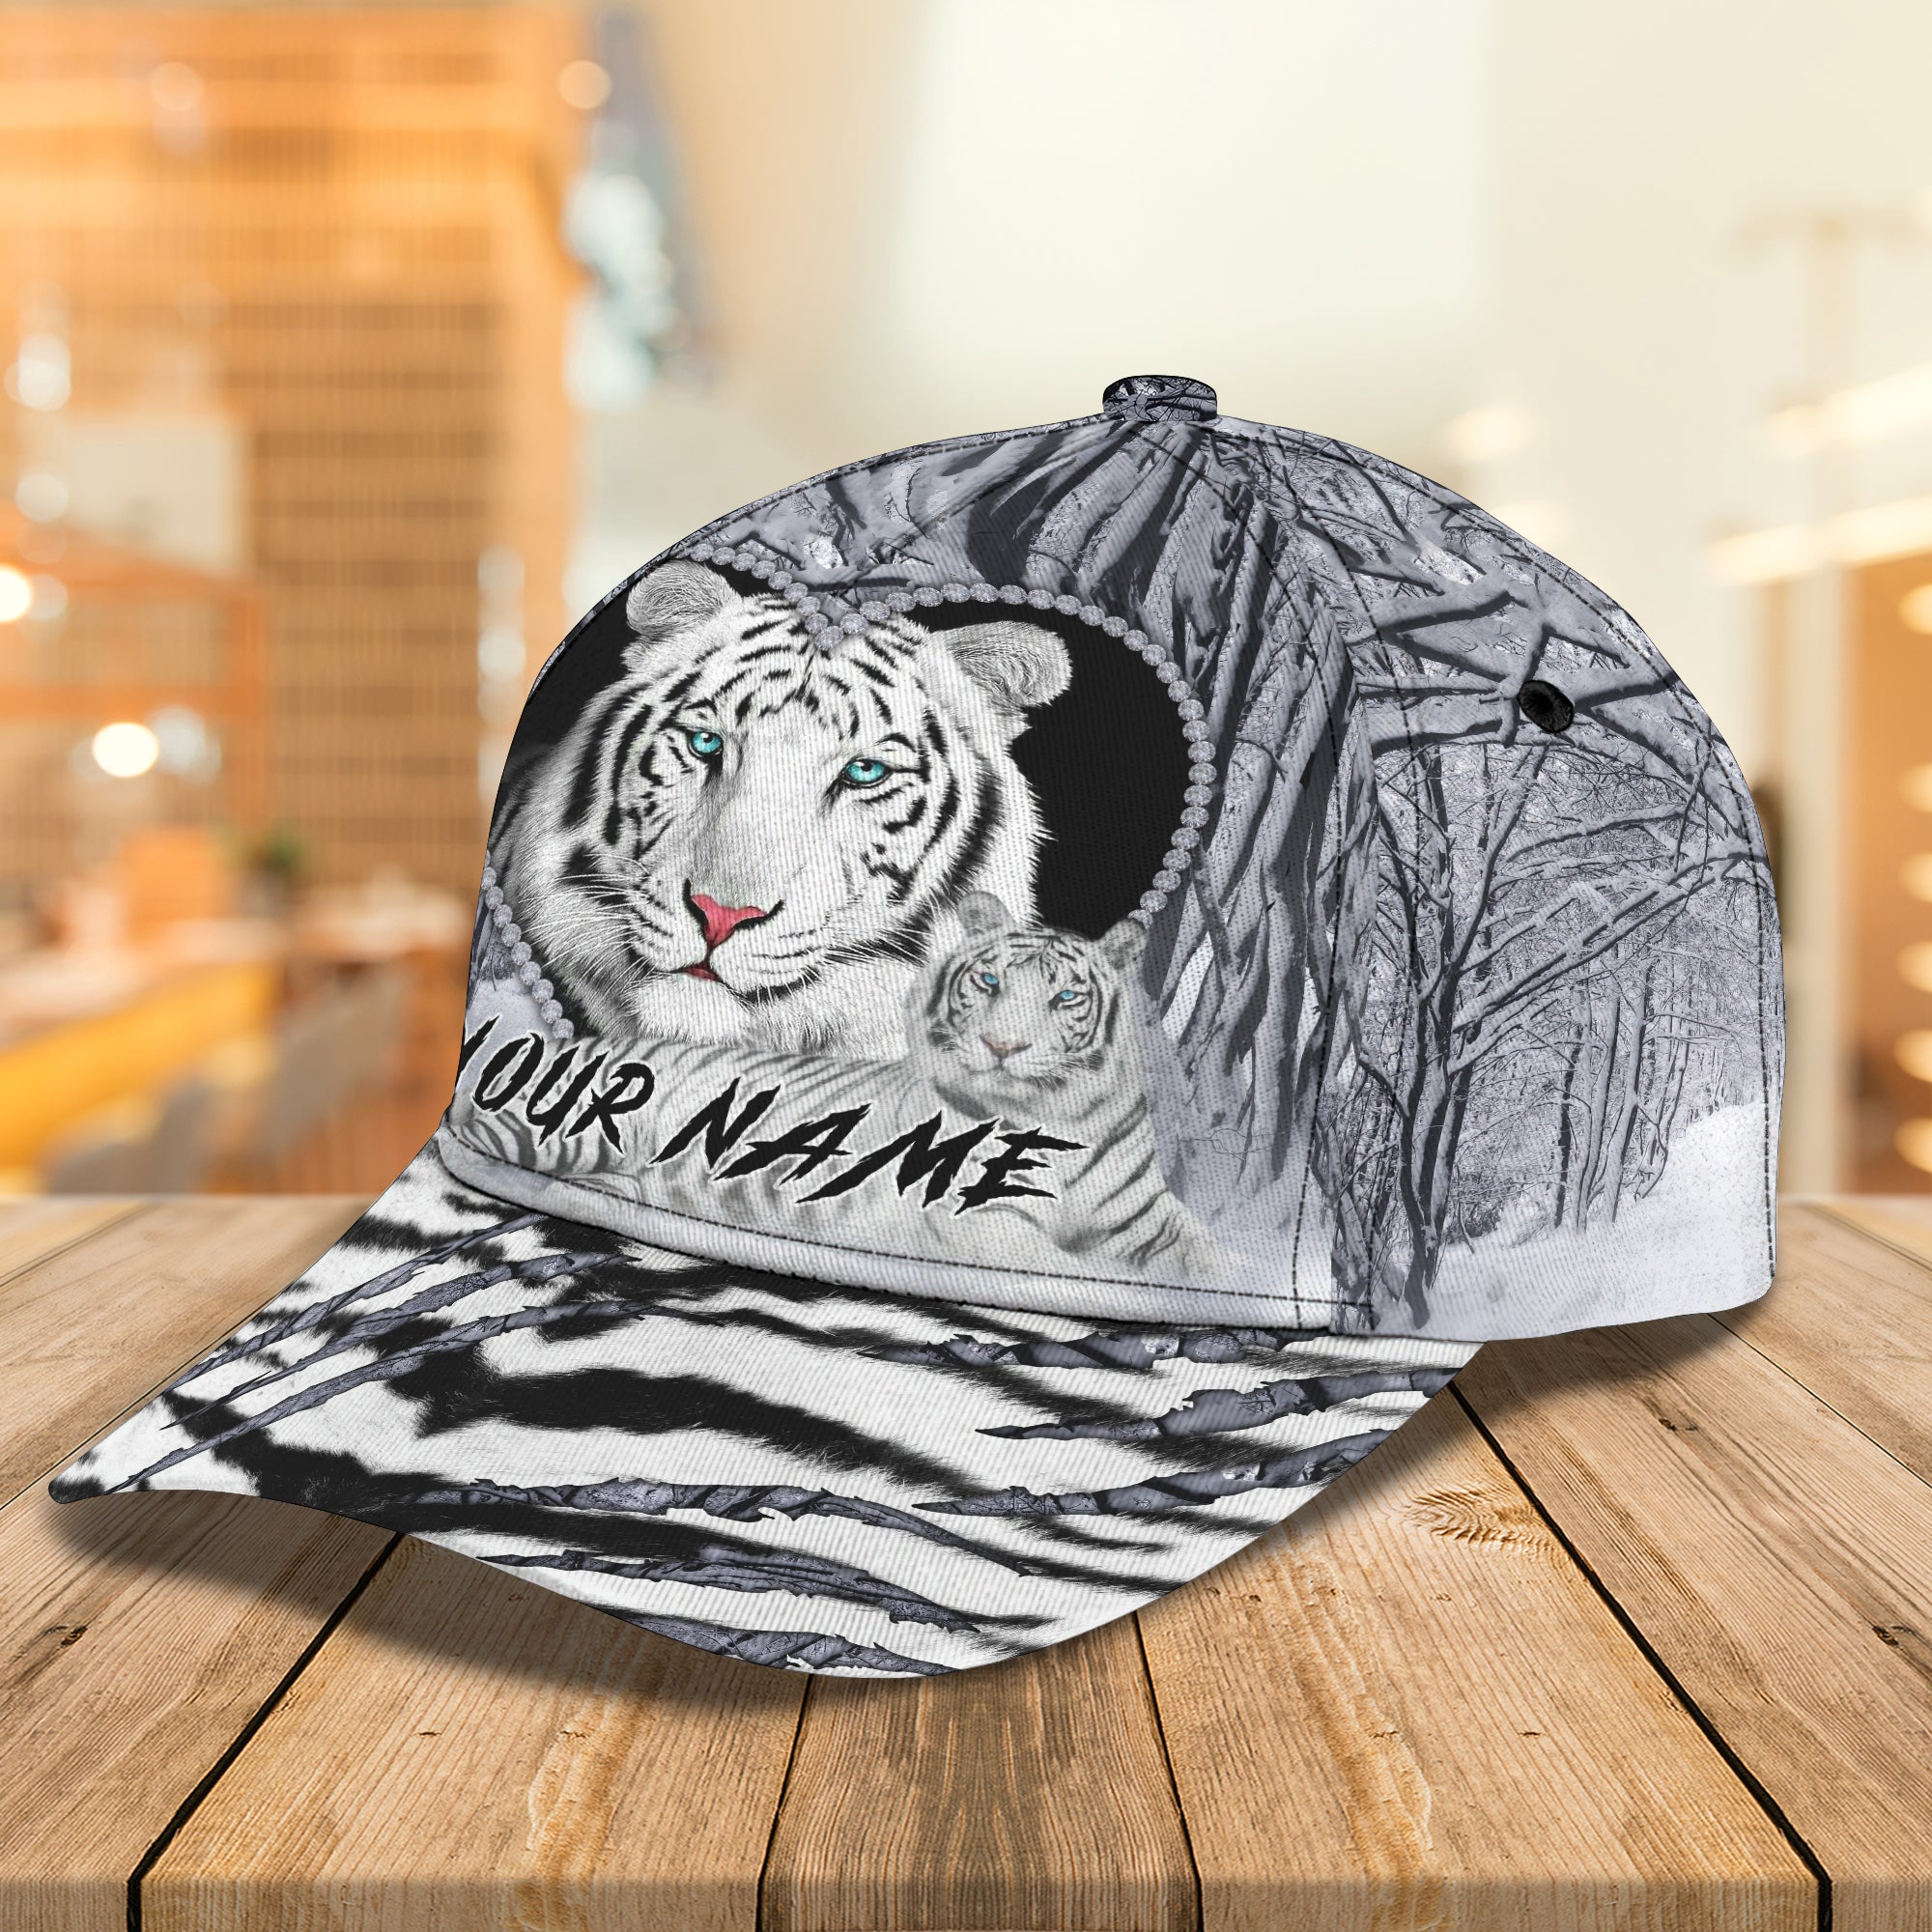 White Tiger - Personalized Name Cap For Tiger Lover